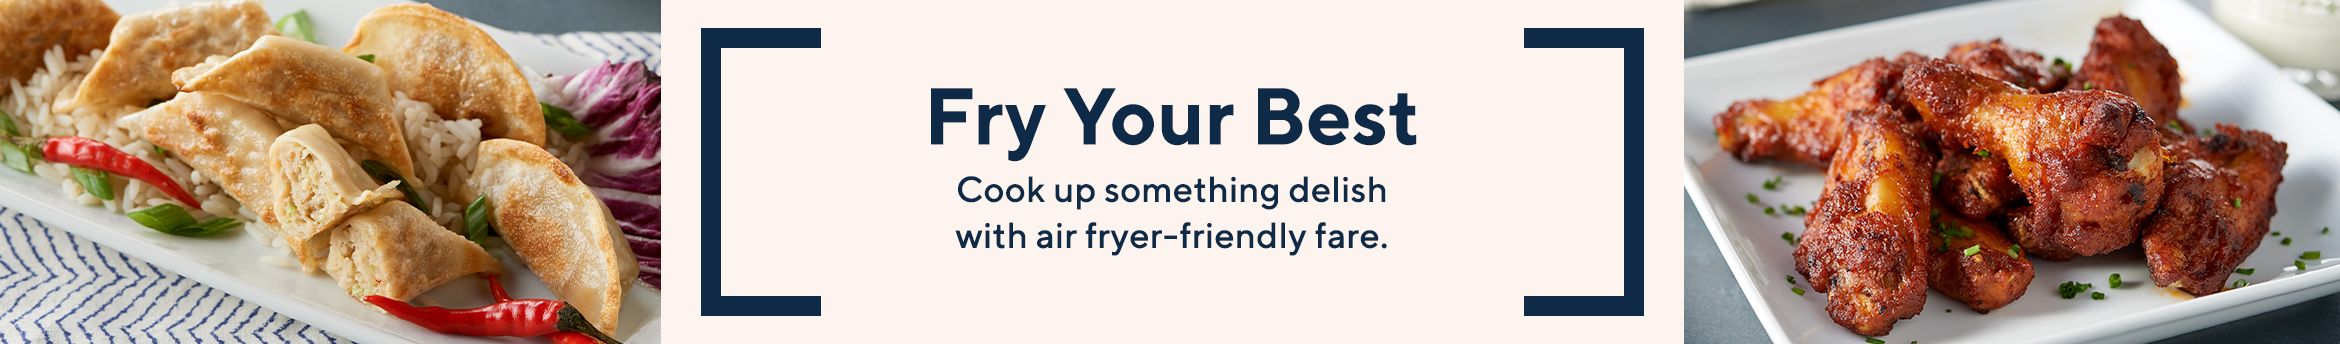 Fry Your Best.  Cook up something delish with air fryer-friendly fare.